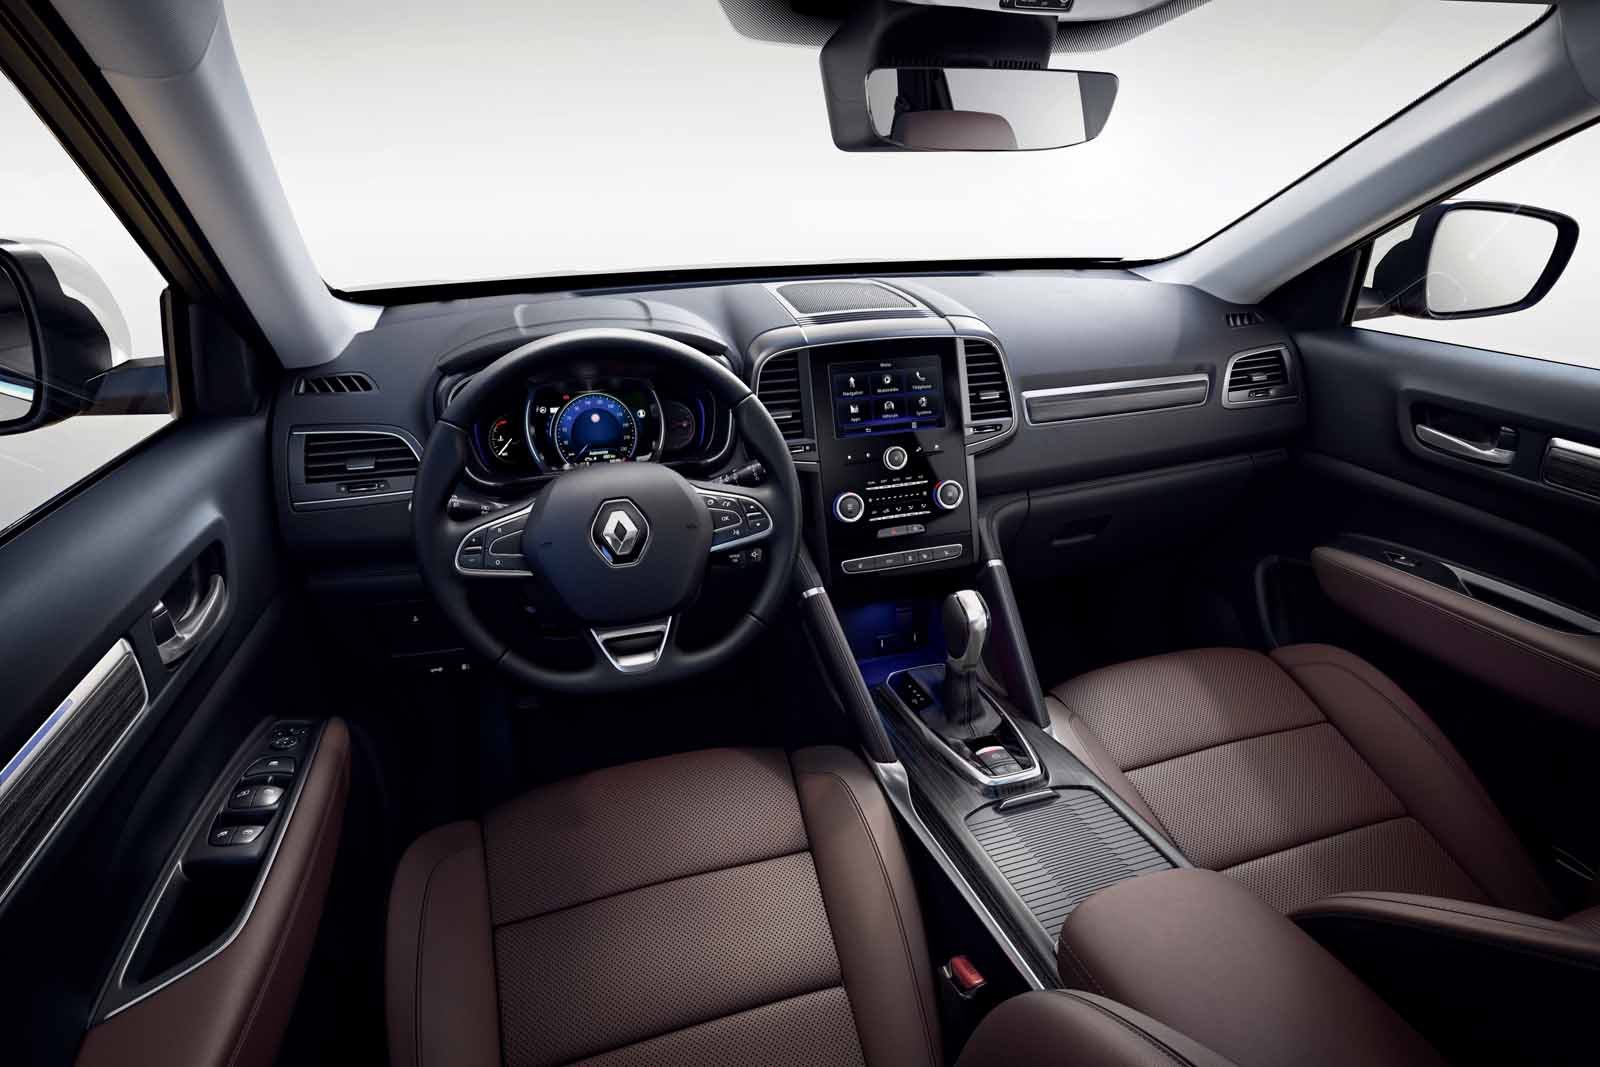 Updated Renault Koleos to cost from £28,195